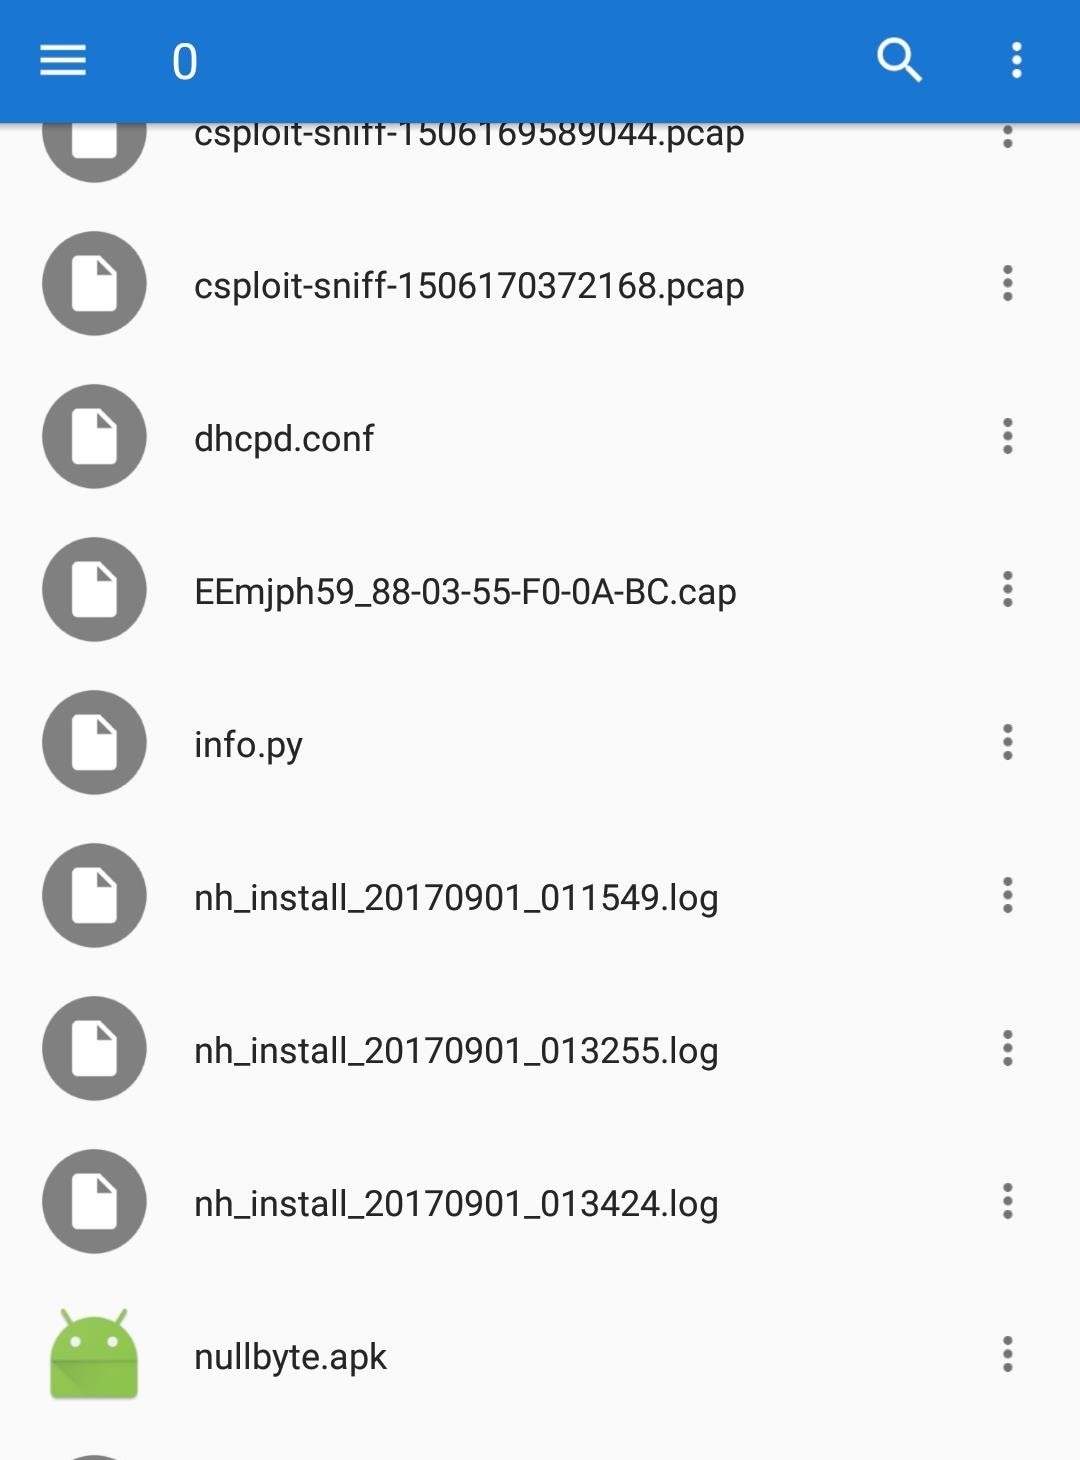 How to Gain Access to an Android Over WAN